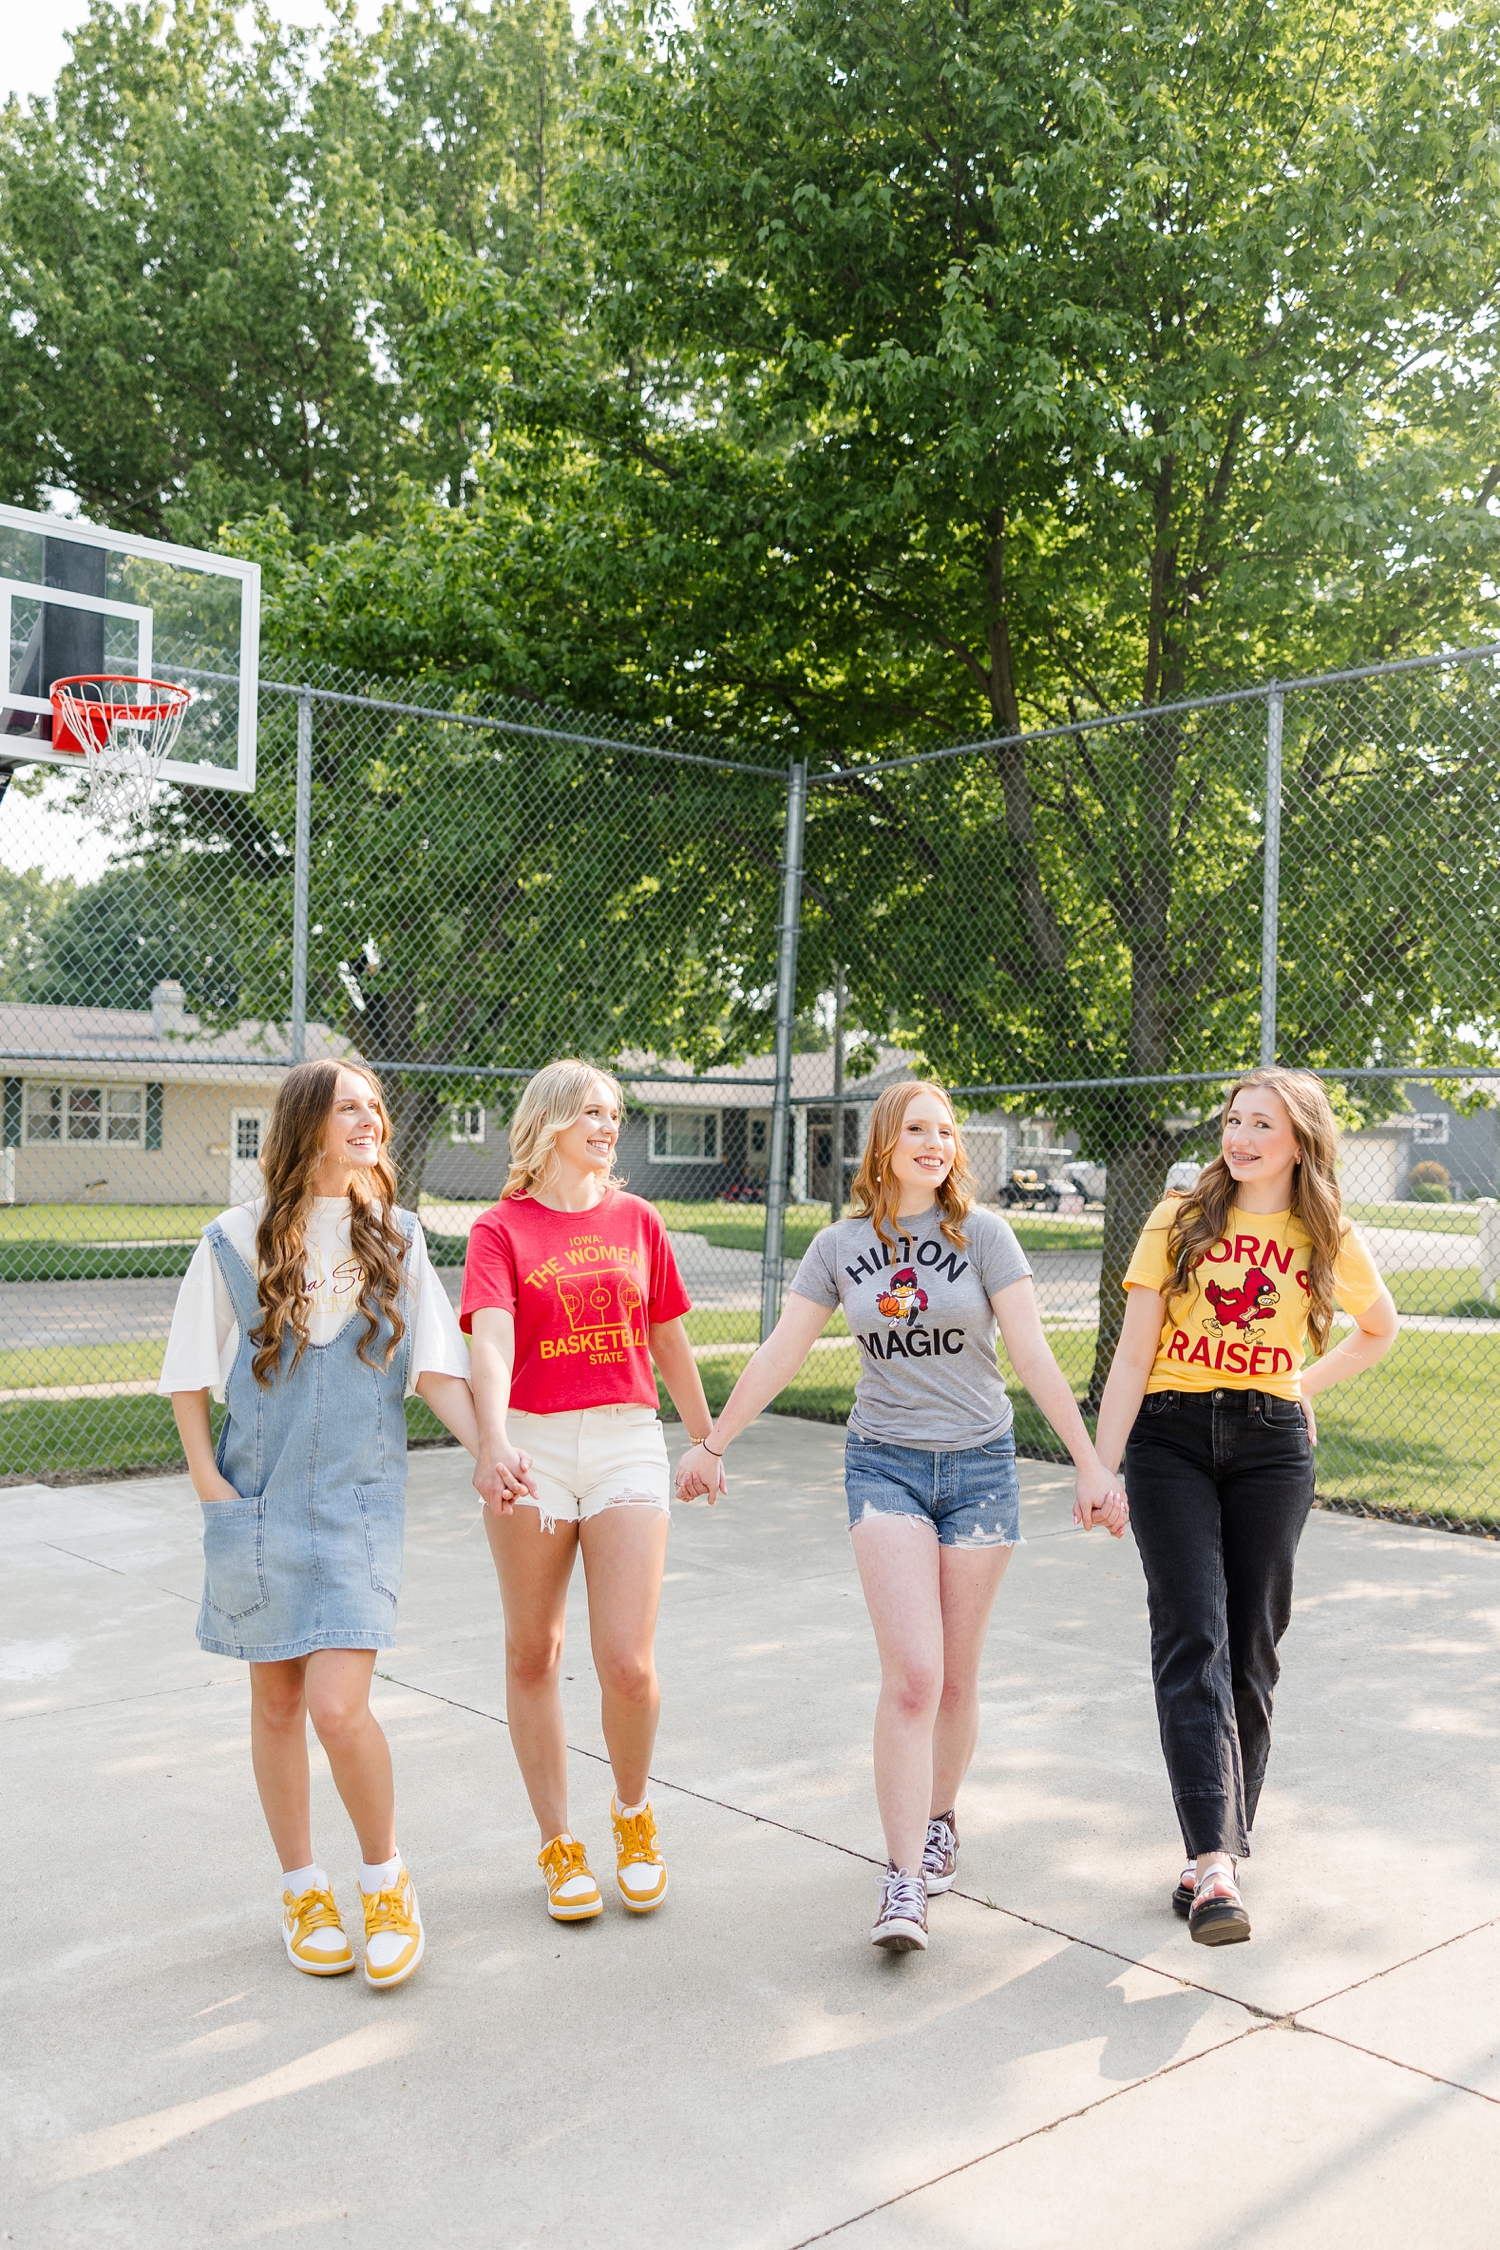 Four TEAM 25 girls, wearing Iowa State clothing, walk together hand and hand on an outdoor basketball court | CB Studio